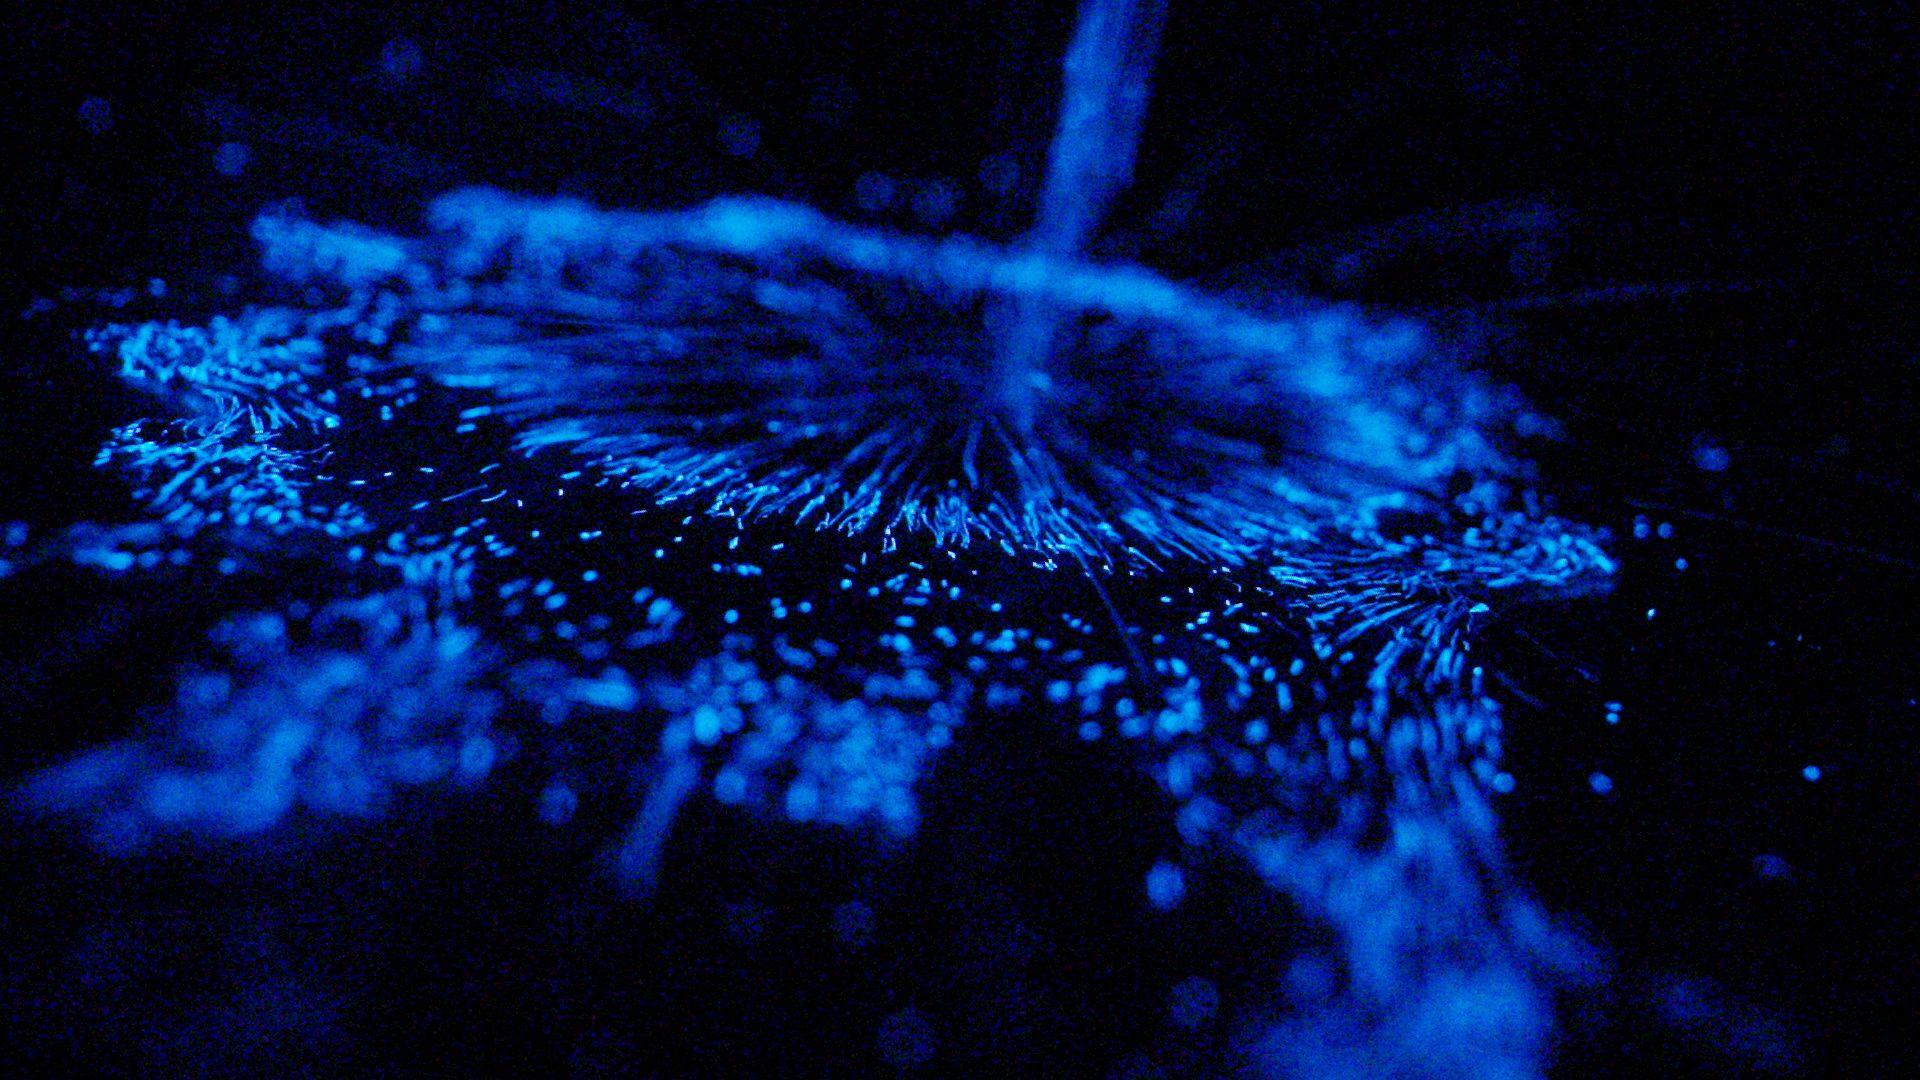 This night hike will lead you to a secret bioluminescent wading pool